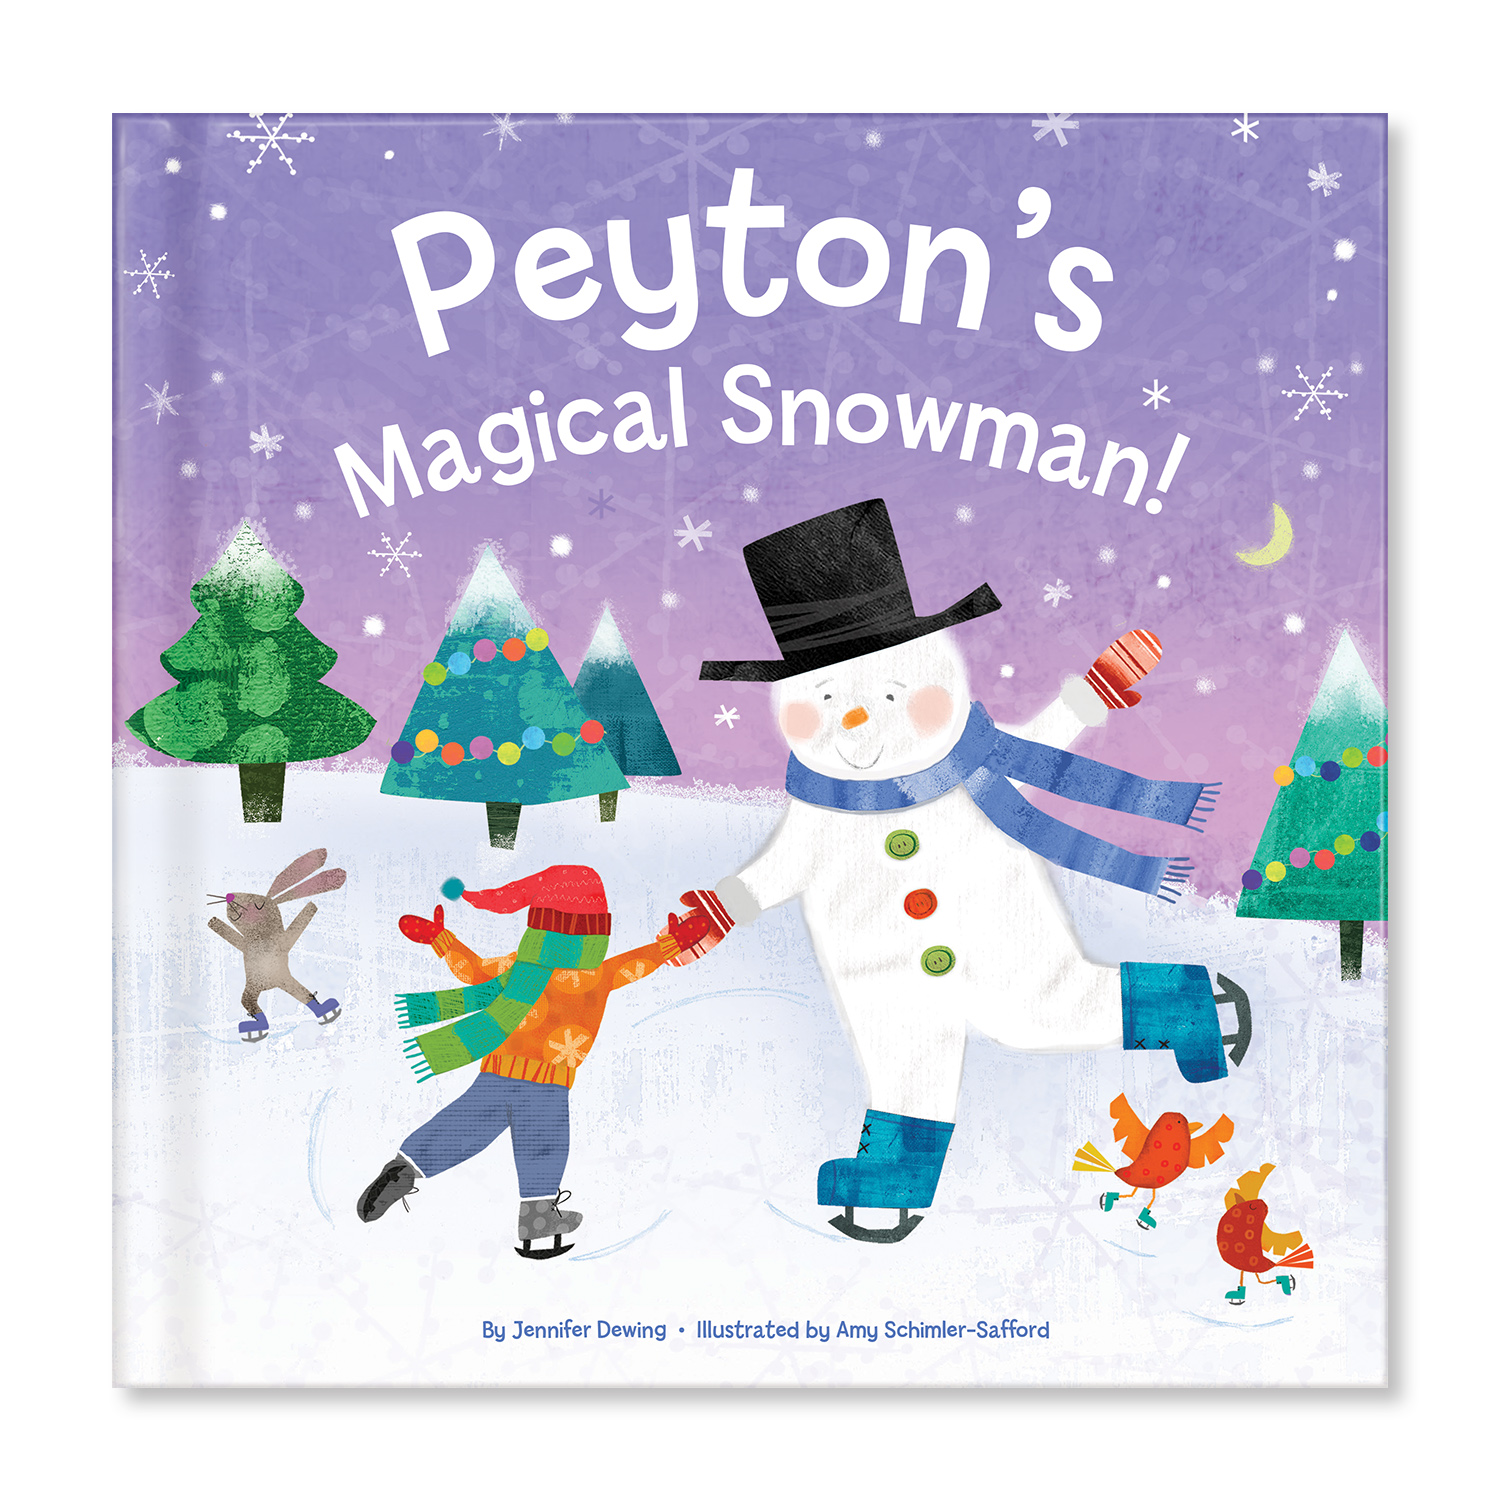 For holiday shoppers looking for a great gift for a special child, ISeeMe.com's new title, "My Magical Snowman" is a heart-warming personalized storybook that is sure to melt hearts.